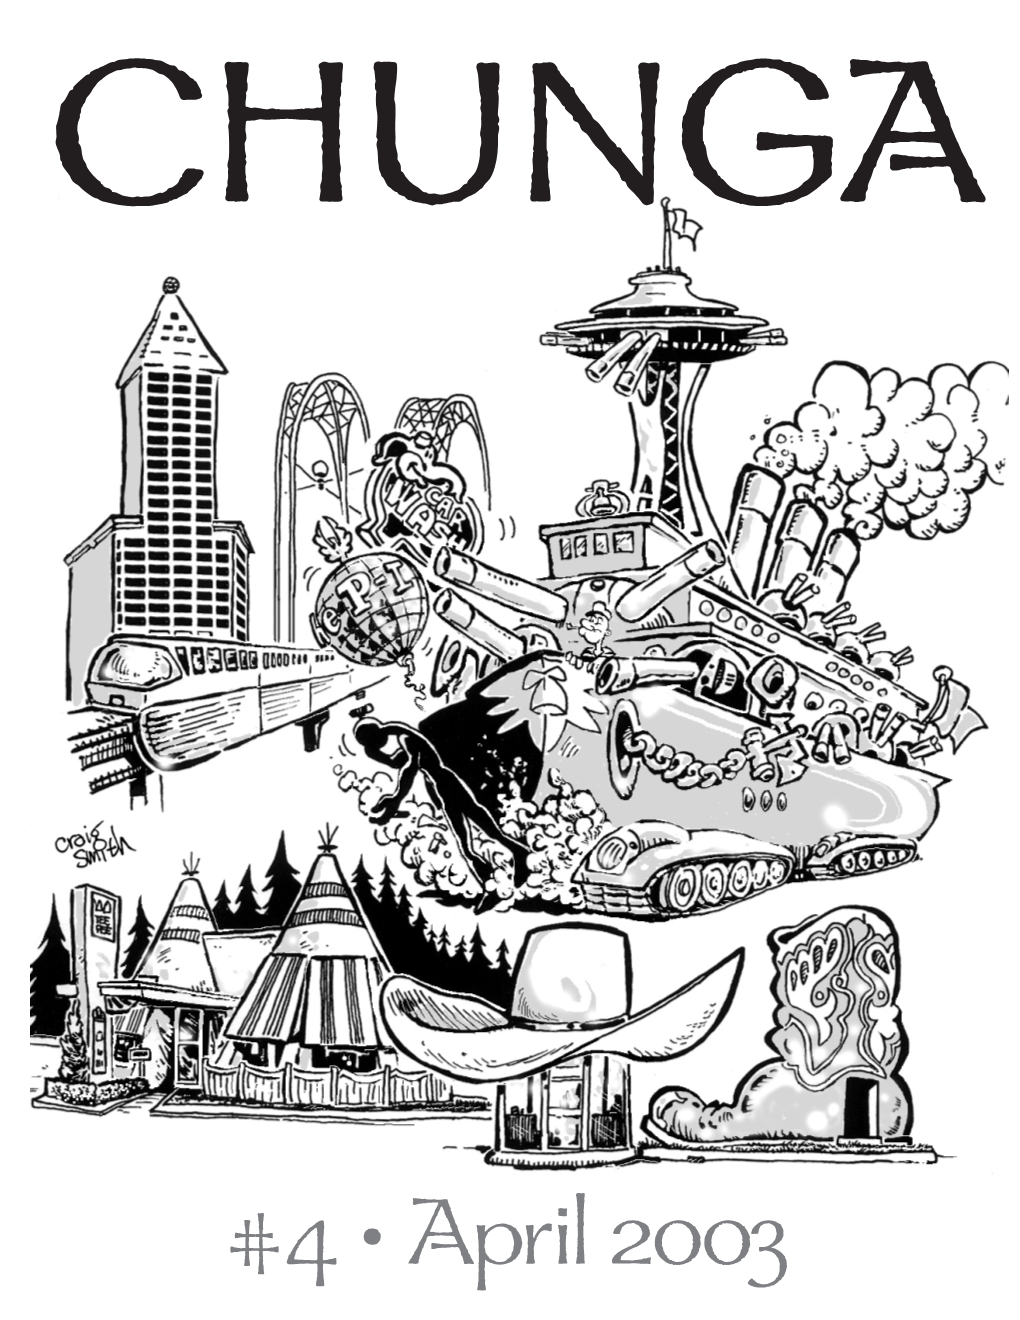 Chunga Is Served by Andy Hooper (Publisher), Randy Byers (Editor), Carl Juarez (Design), and Our Esteemed Contribu- Tors, Listed Below